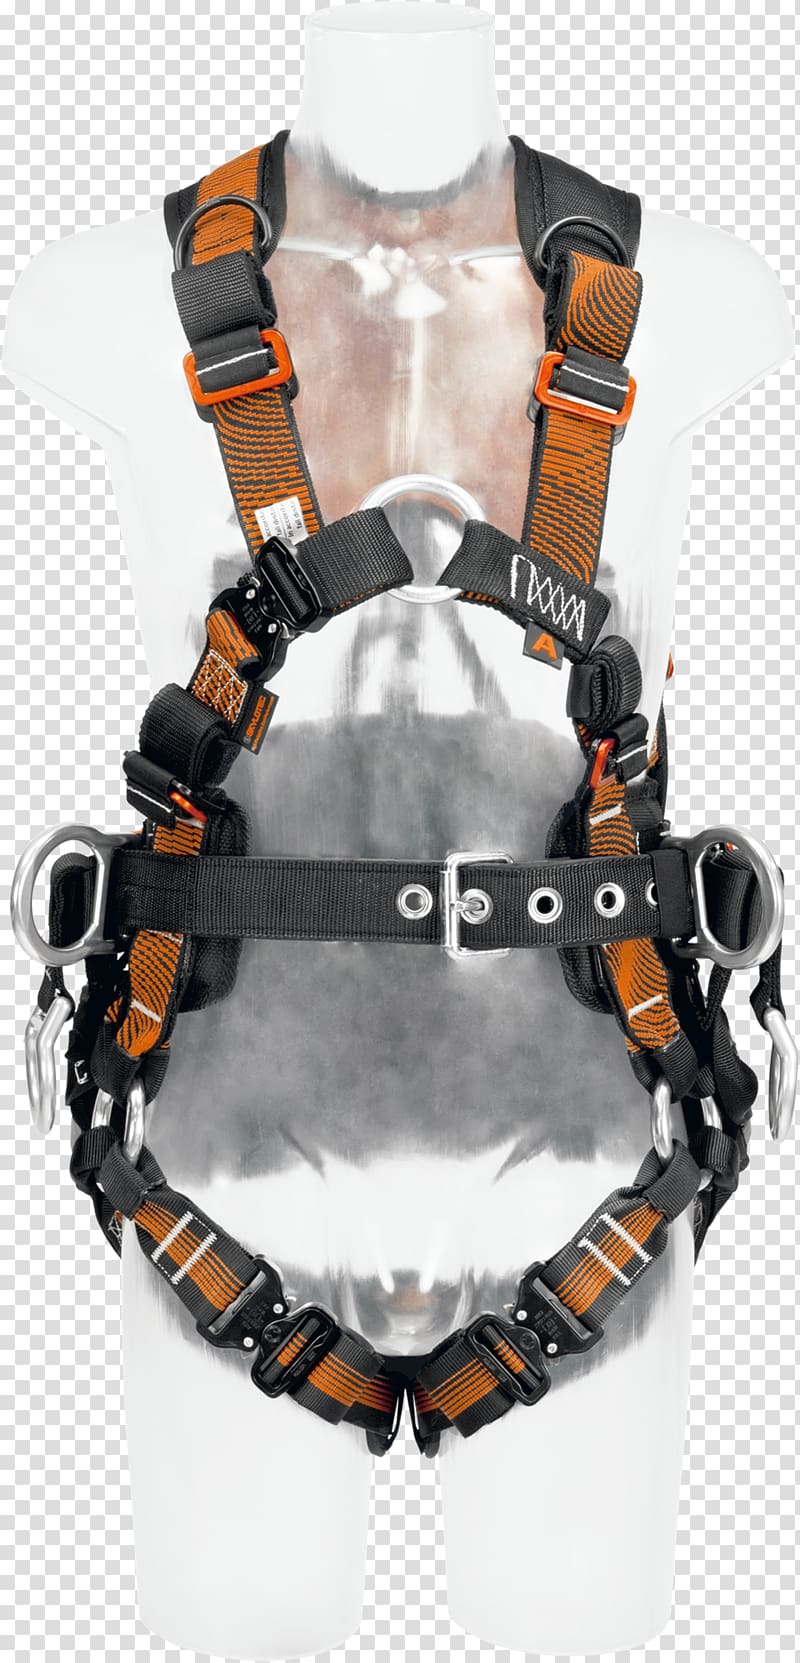 Climbing Harnesses Safety harness SKYLOTEC Fall arrest Personal protective equipment, others transparent background PNG clipart